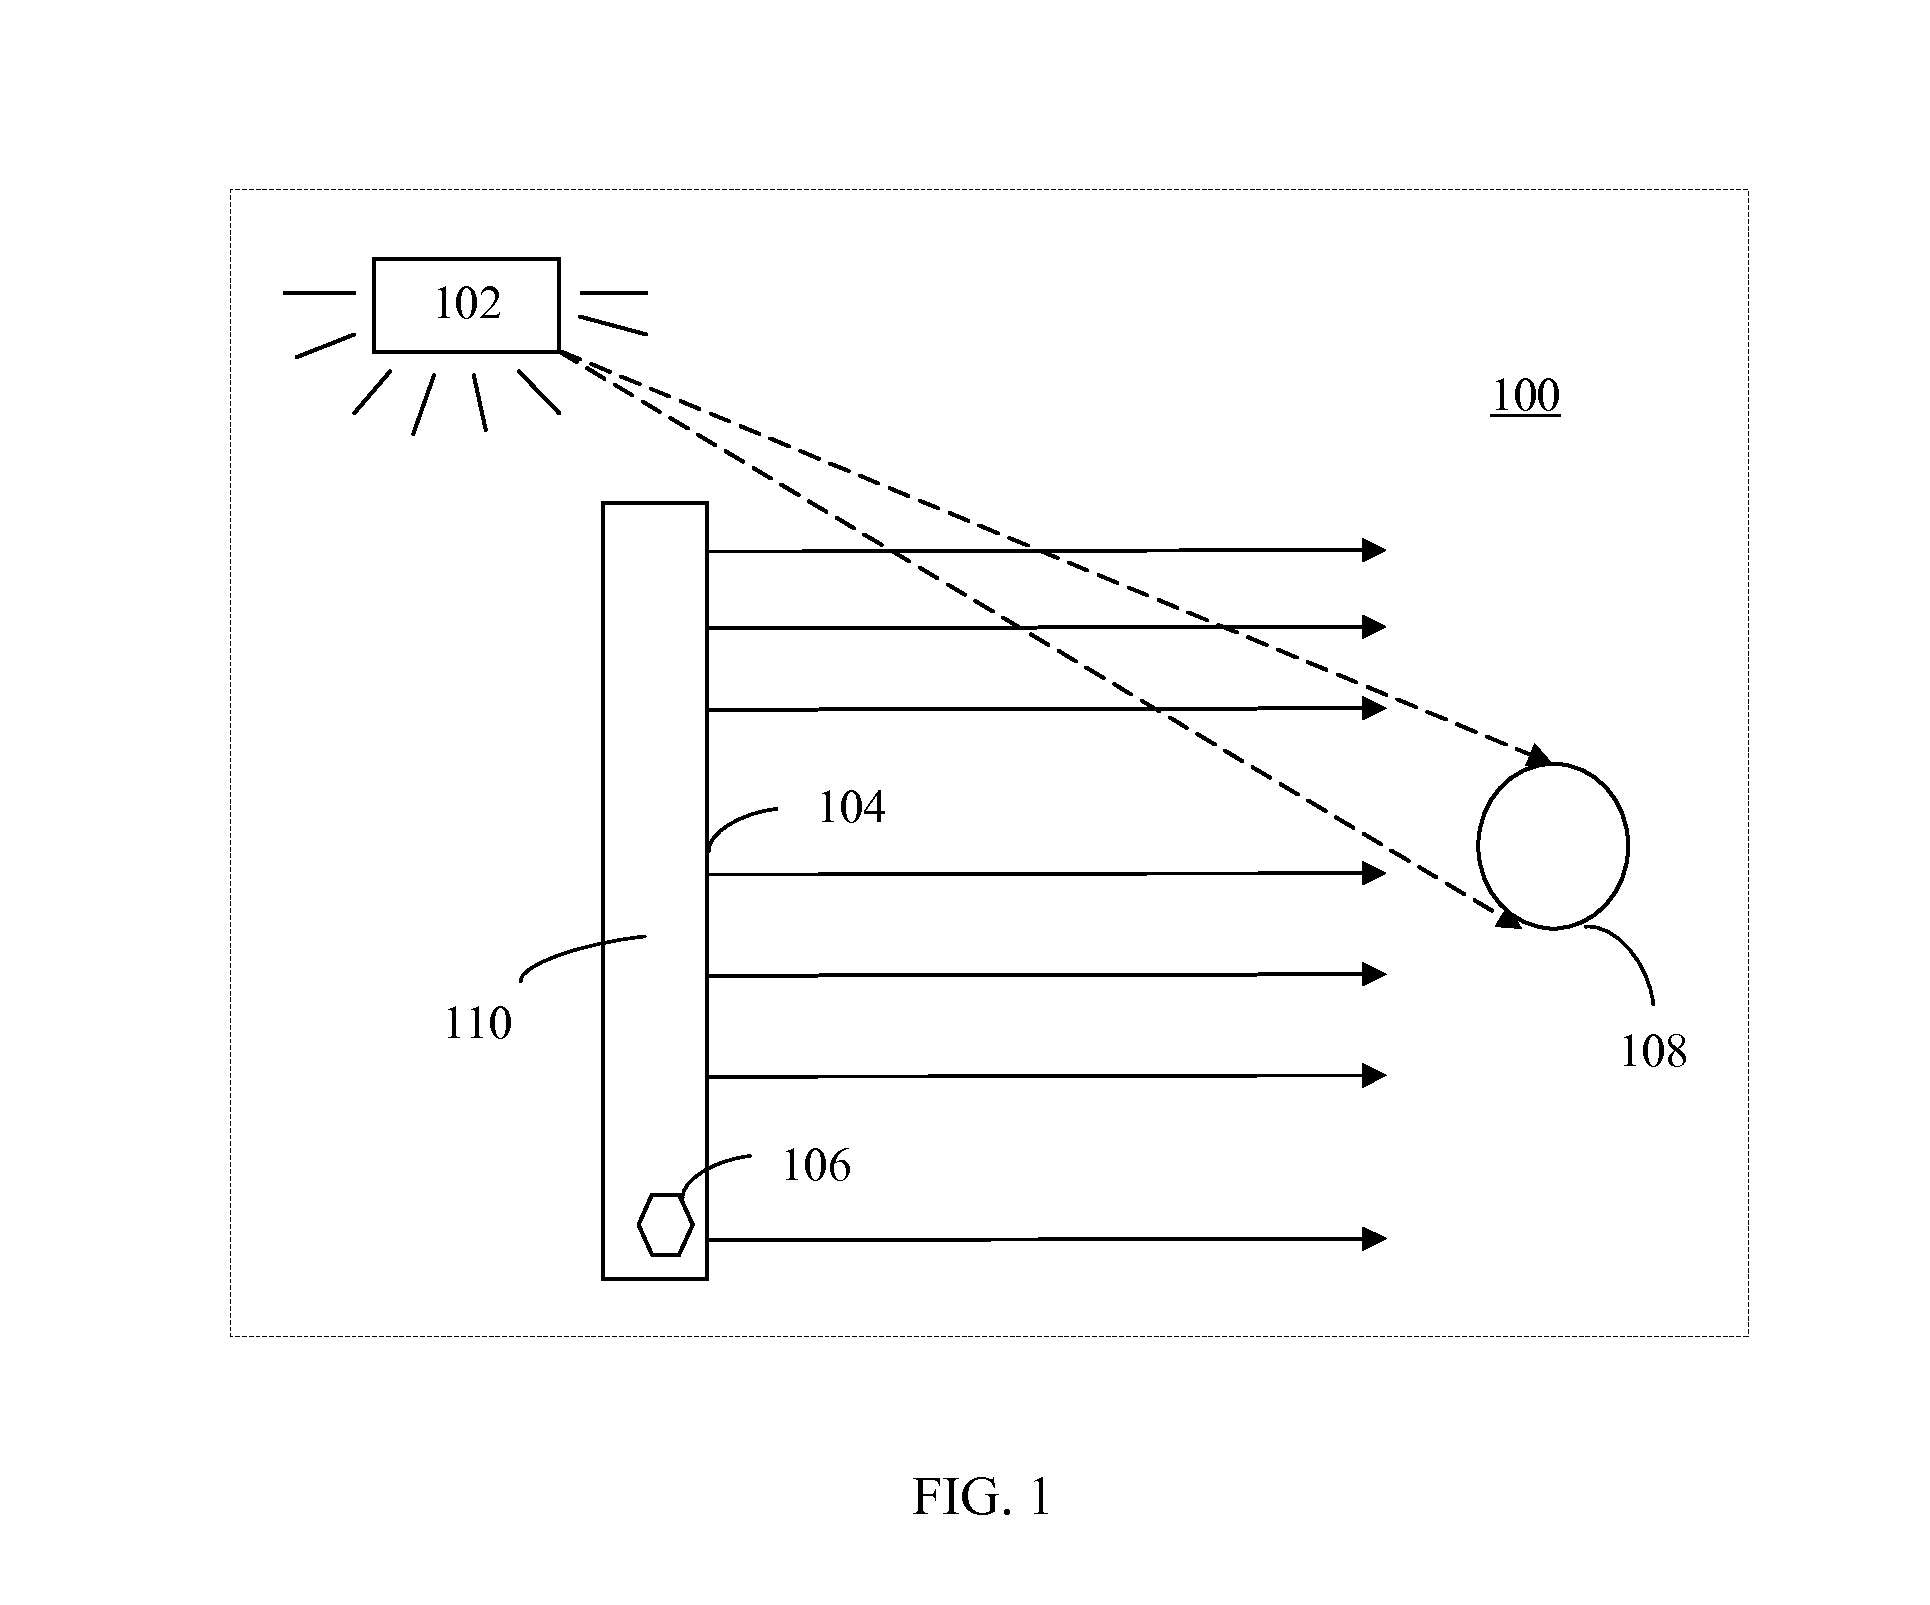 Automatic adjustment of display systems based on light at viewer position